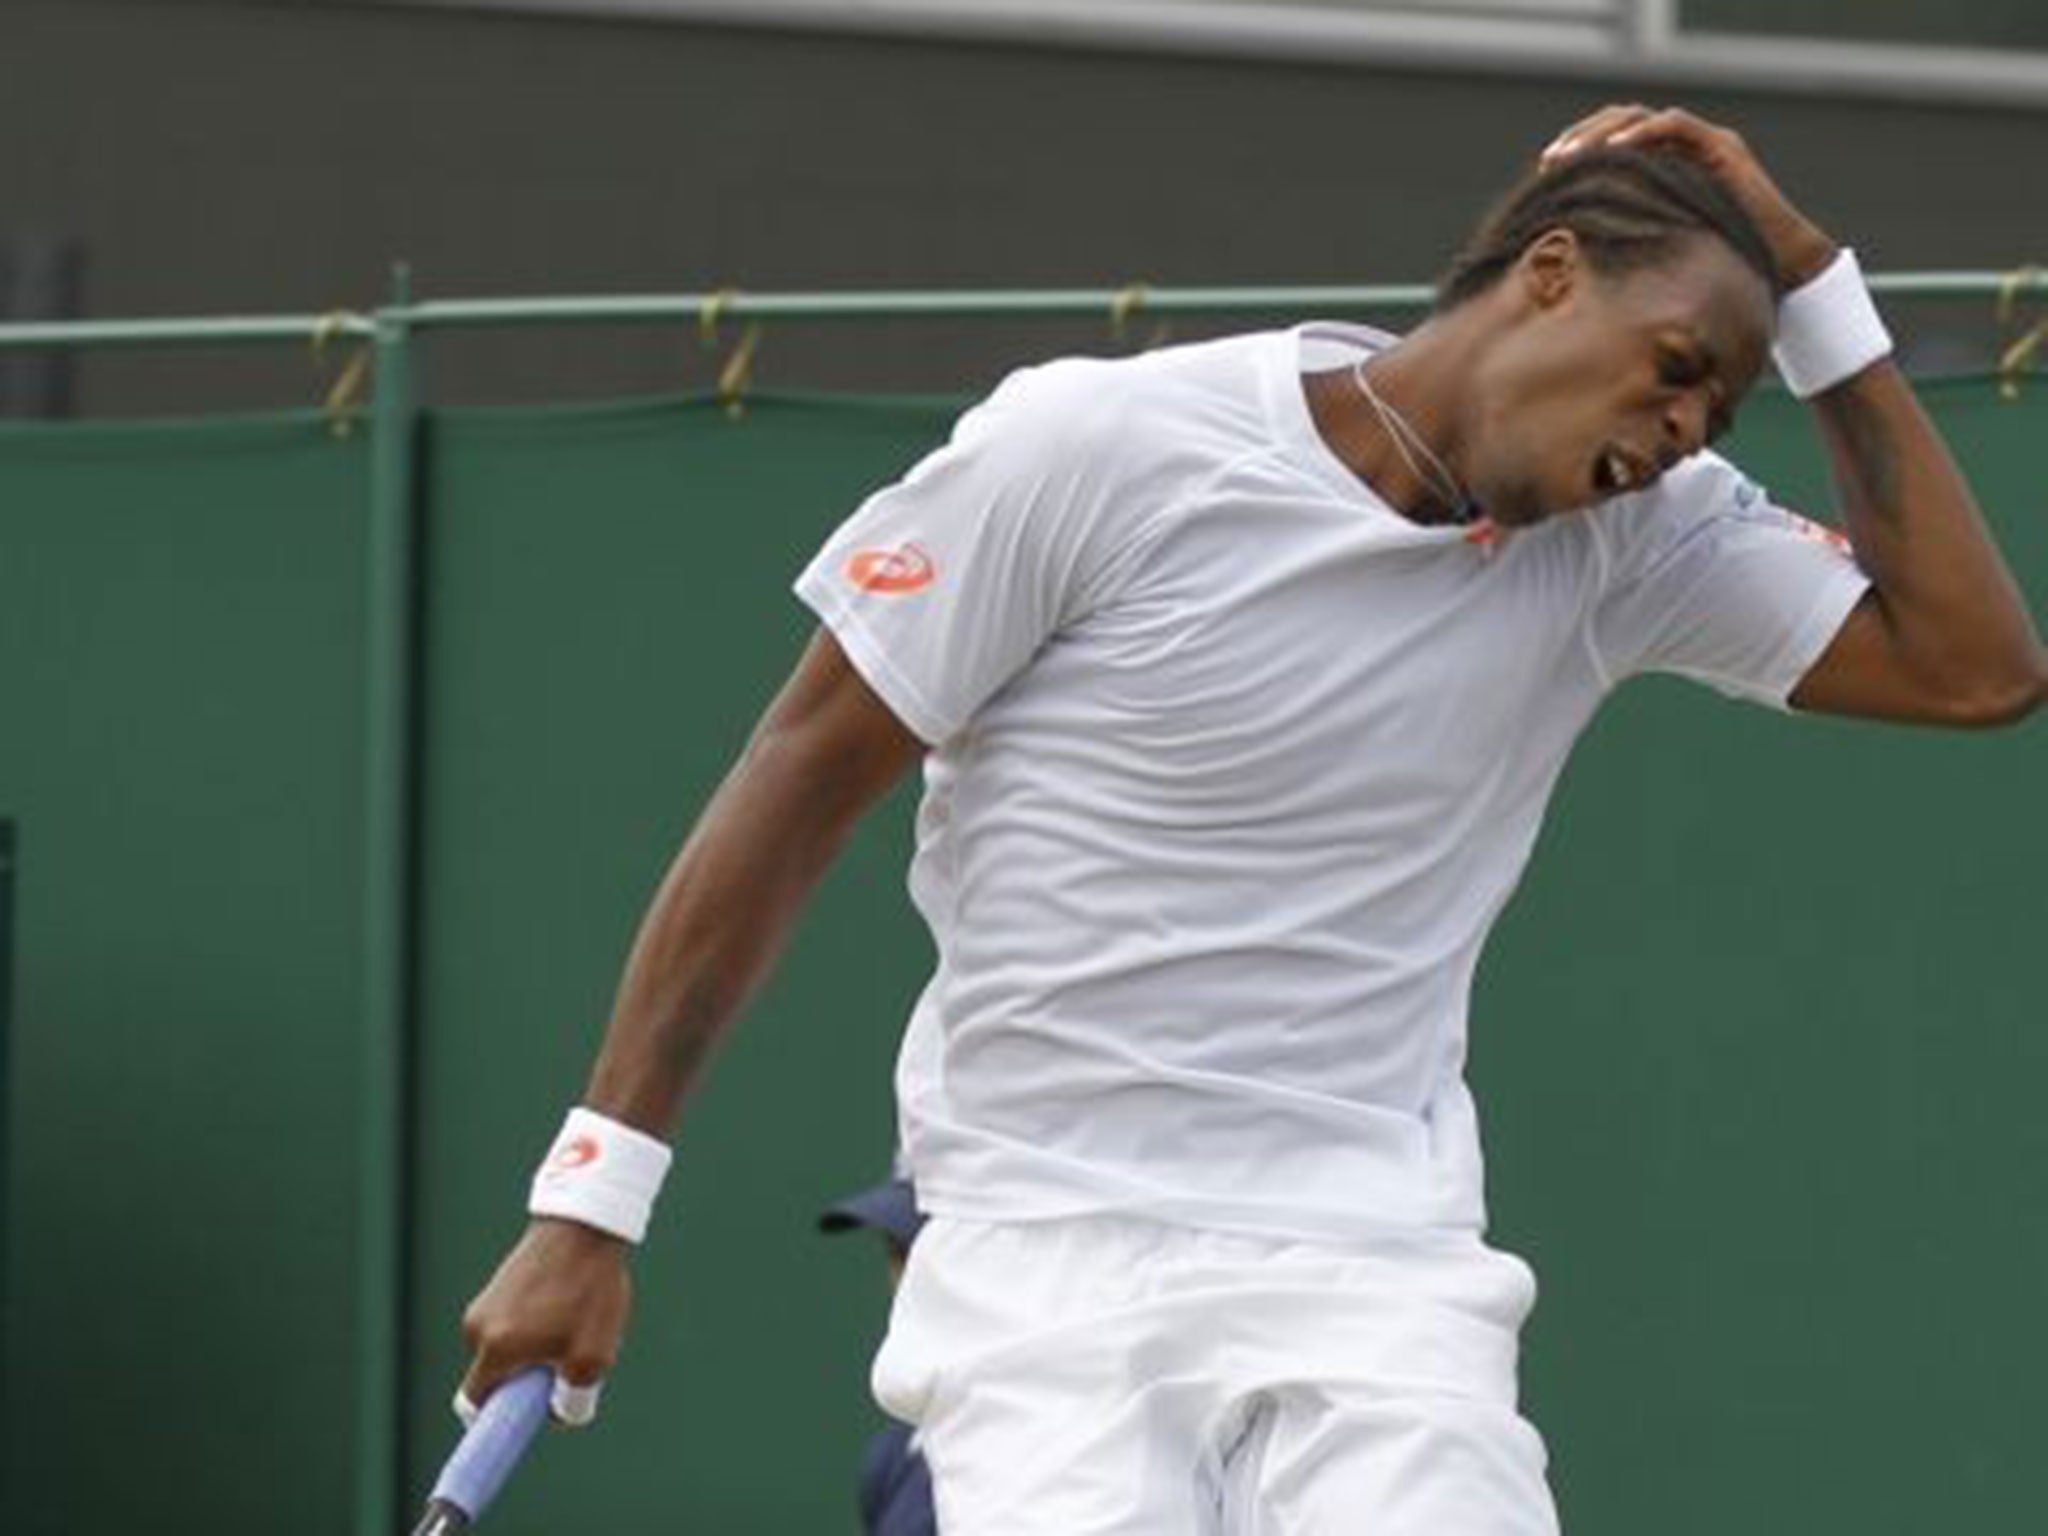 Gaël Monfils made another early Wimbledon exit, this time at the hands of Jiri Vesely